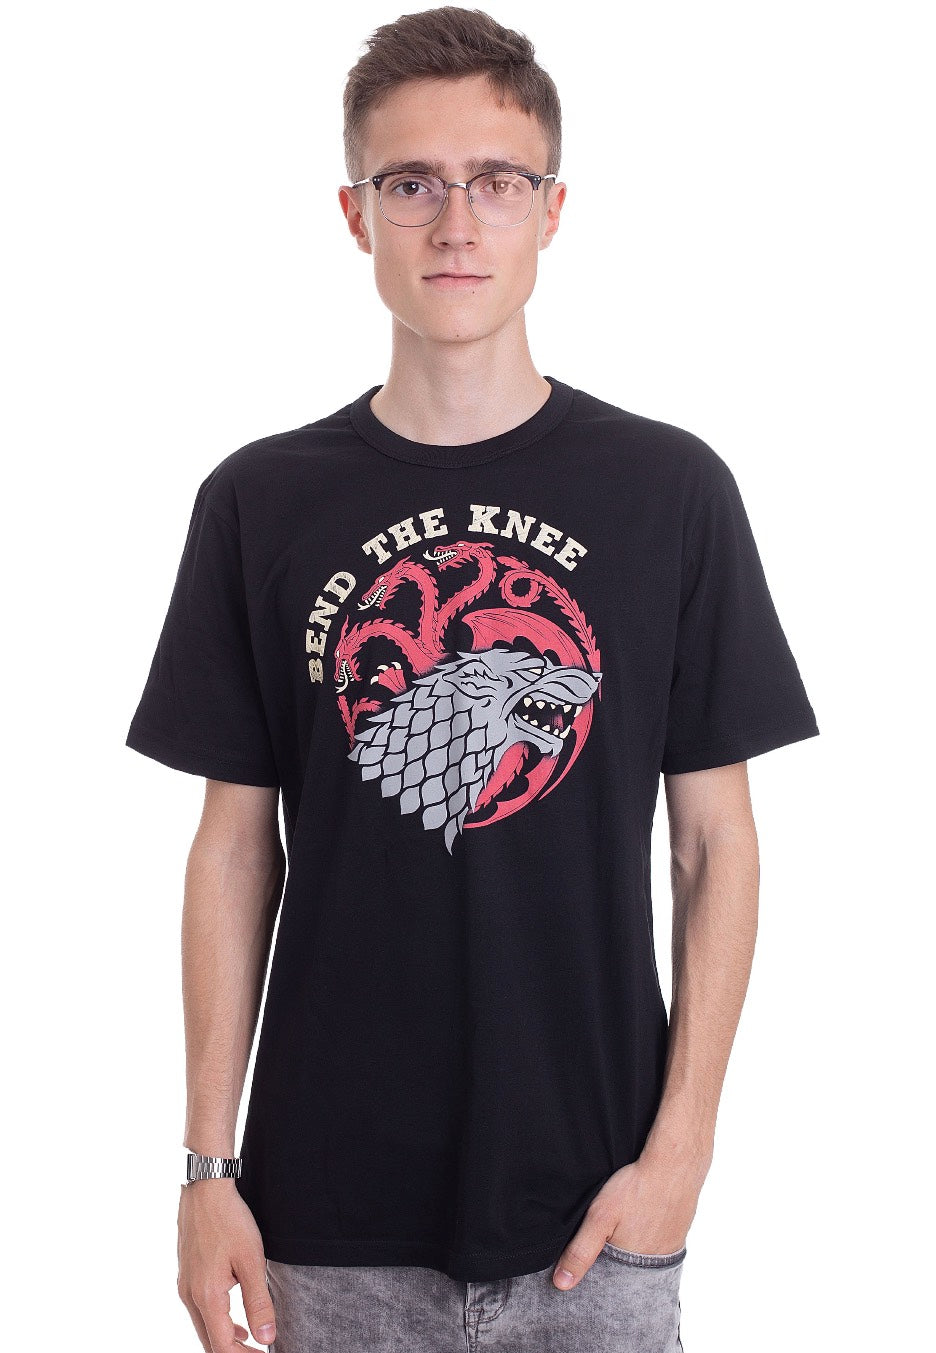 Game Of Thrones - Bend The Knee - T-Shirt